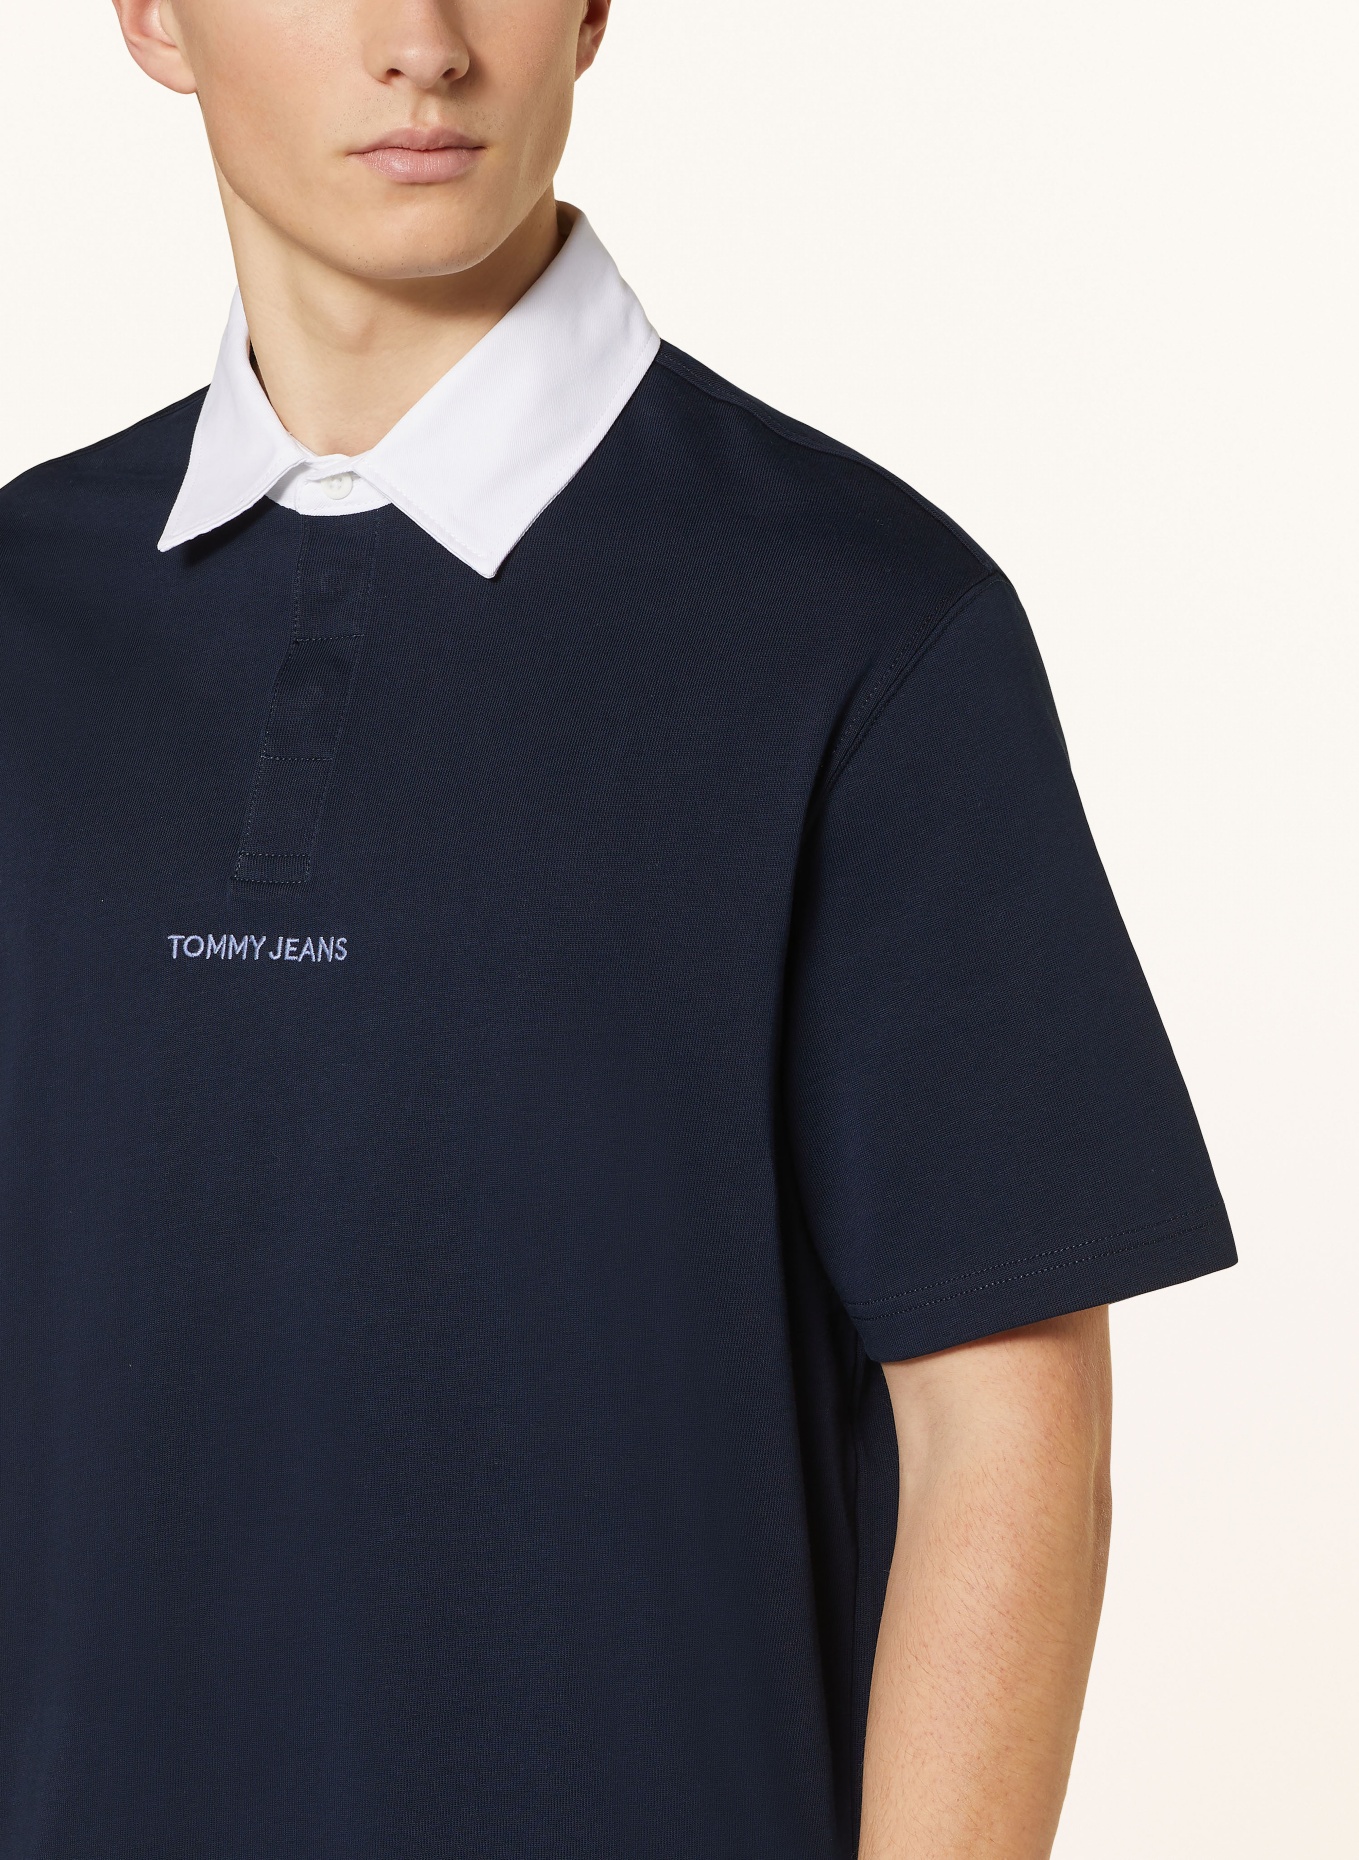 TOMMY JEANS Jersey polo shirt oversized fit, Color: DARK BLUE (Image 4)